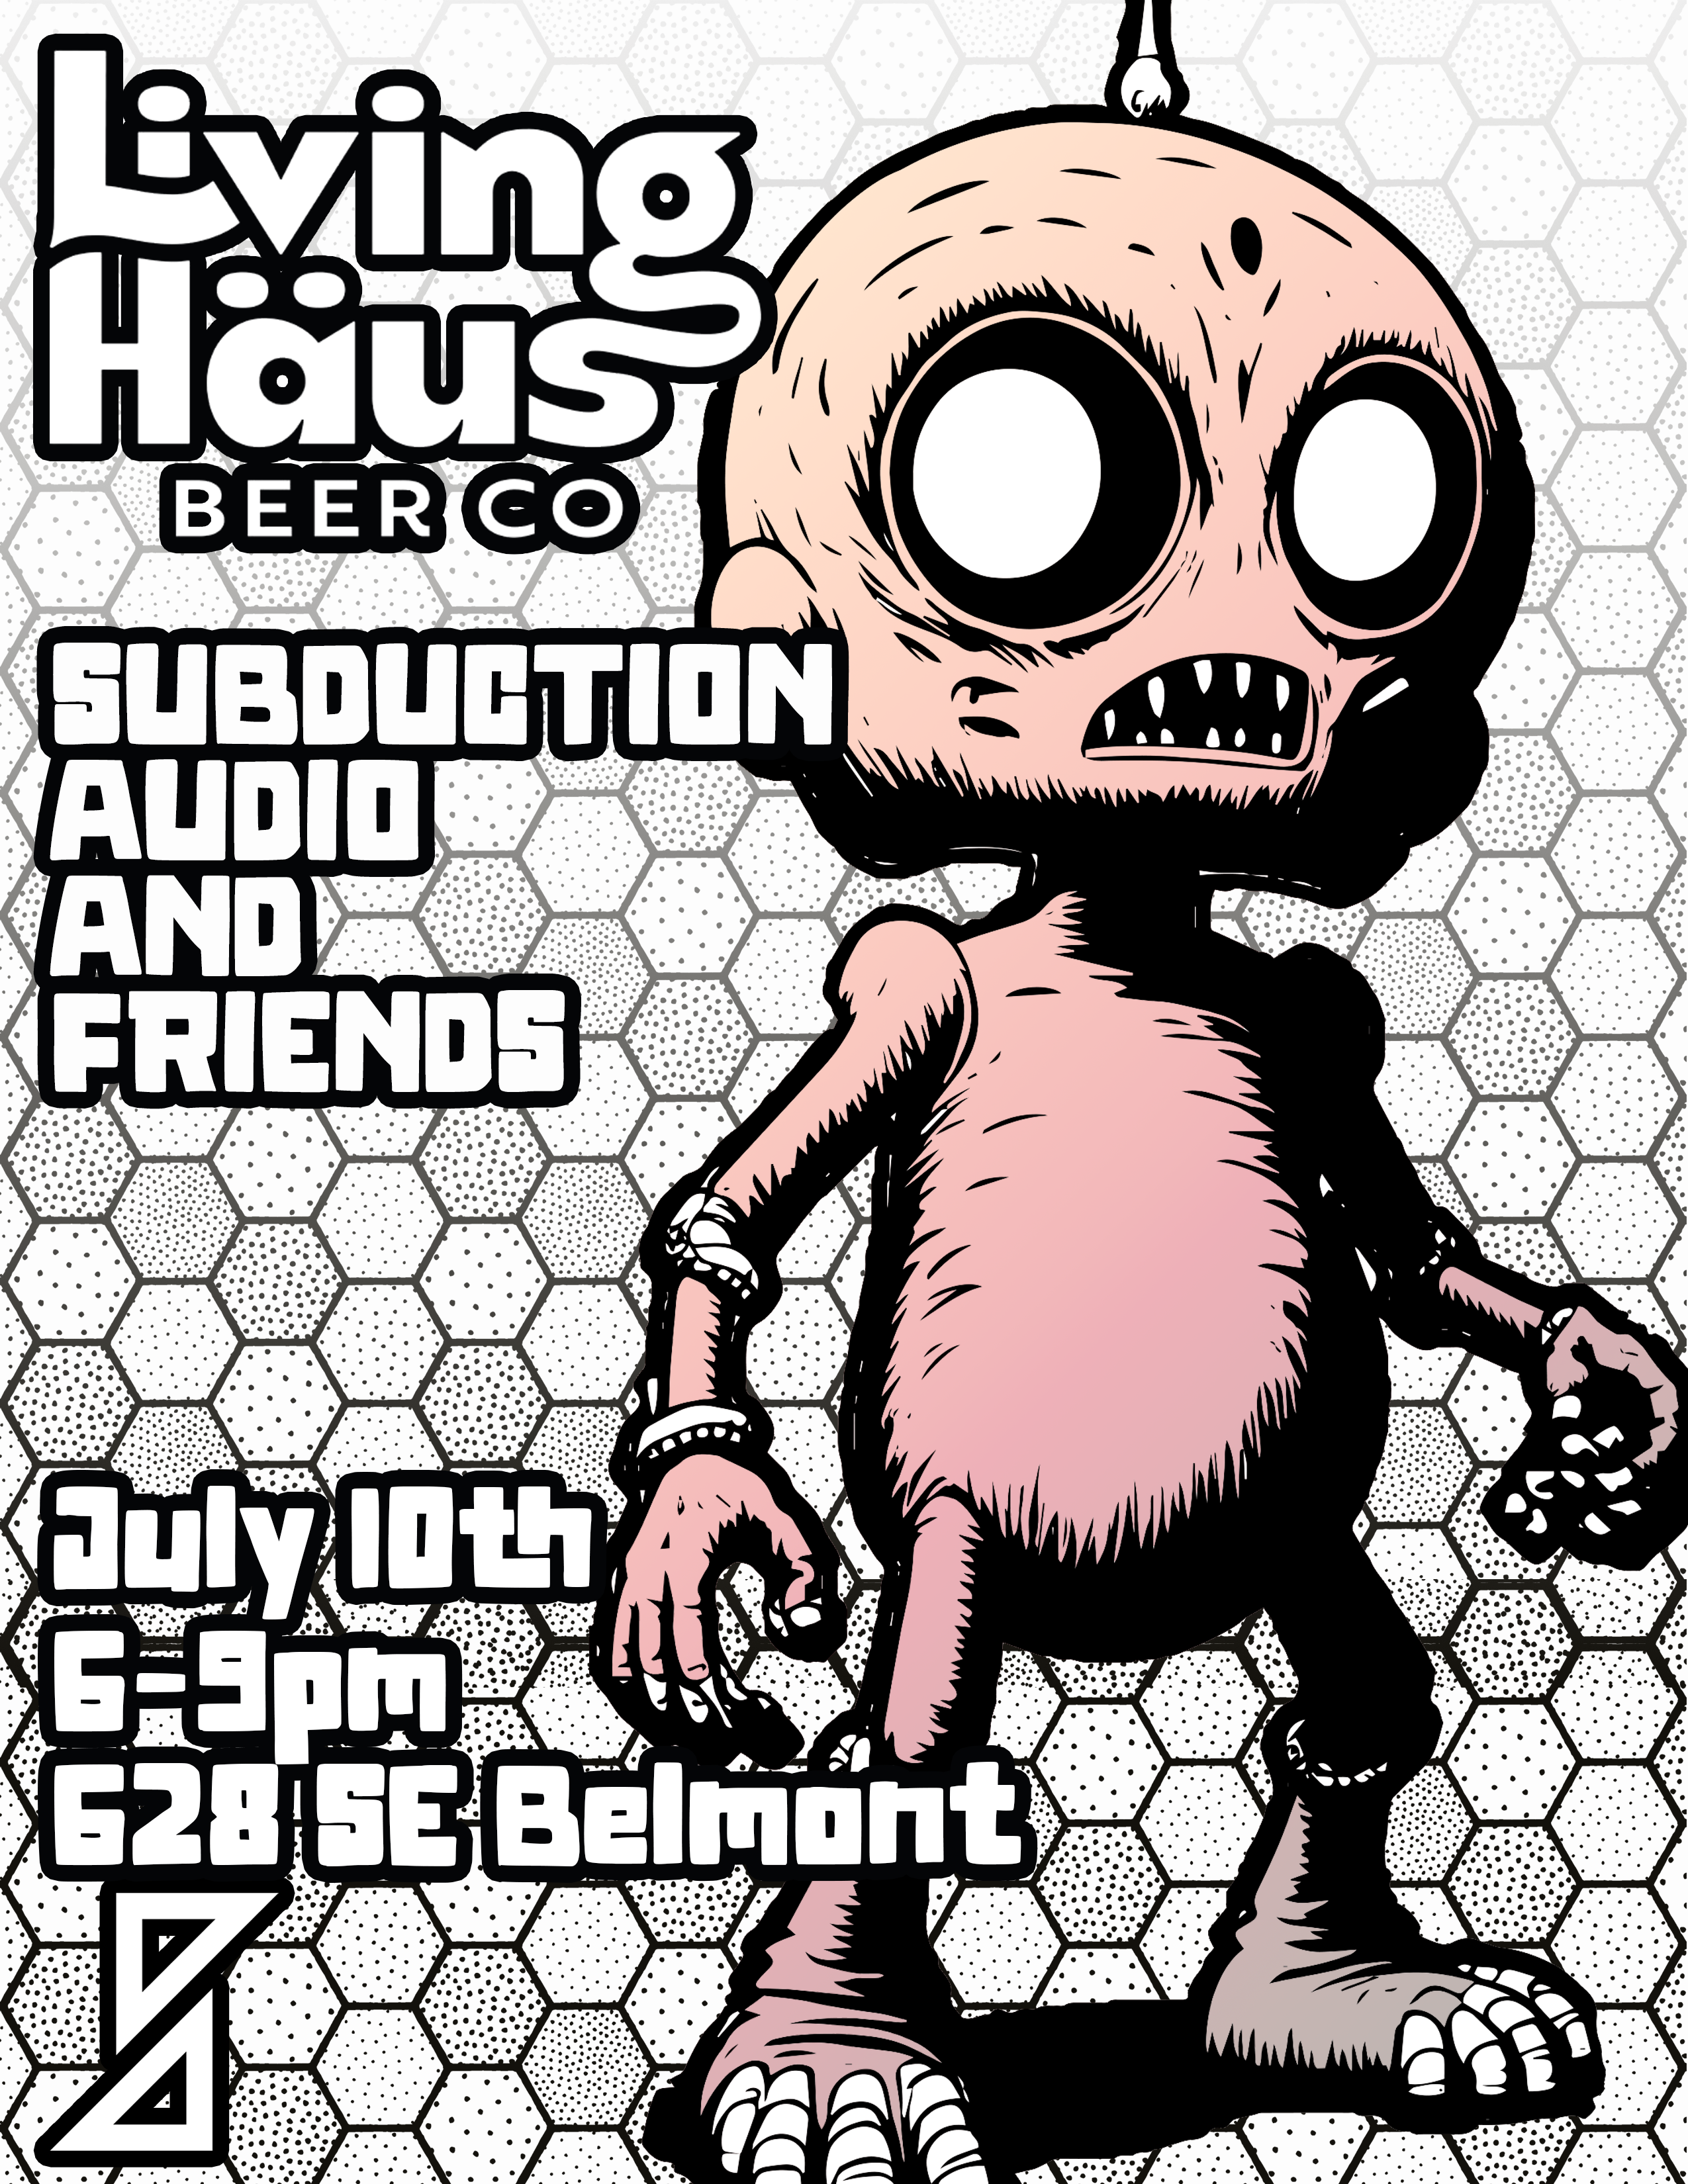 Subduction Audio and Friends 11